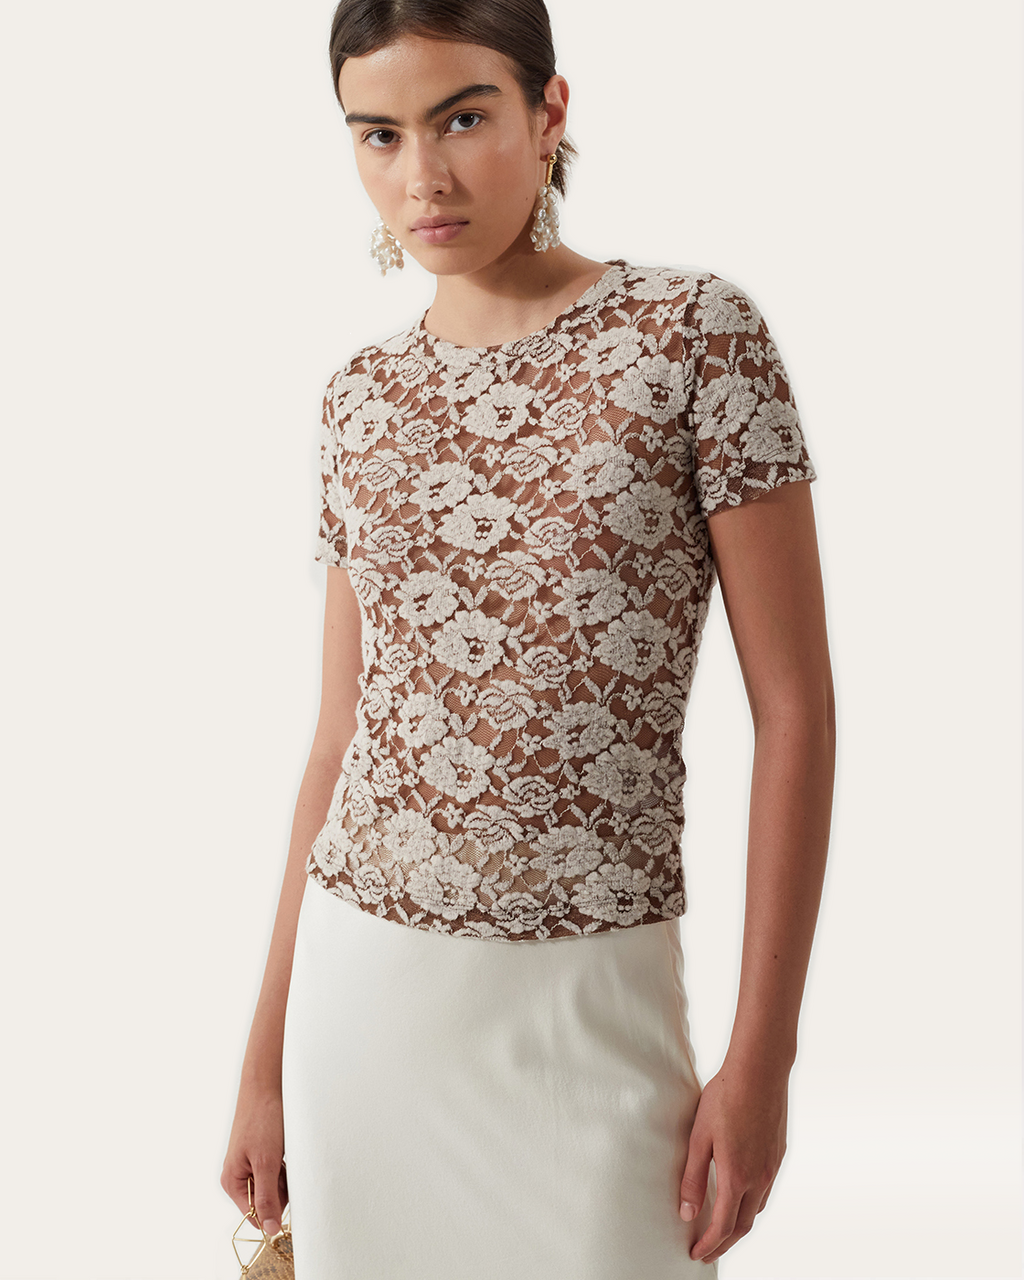 Adina T-Shirt Cotton Blend Floral Lace Brown - Special Price